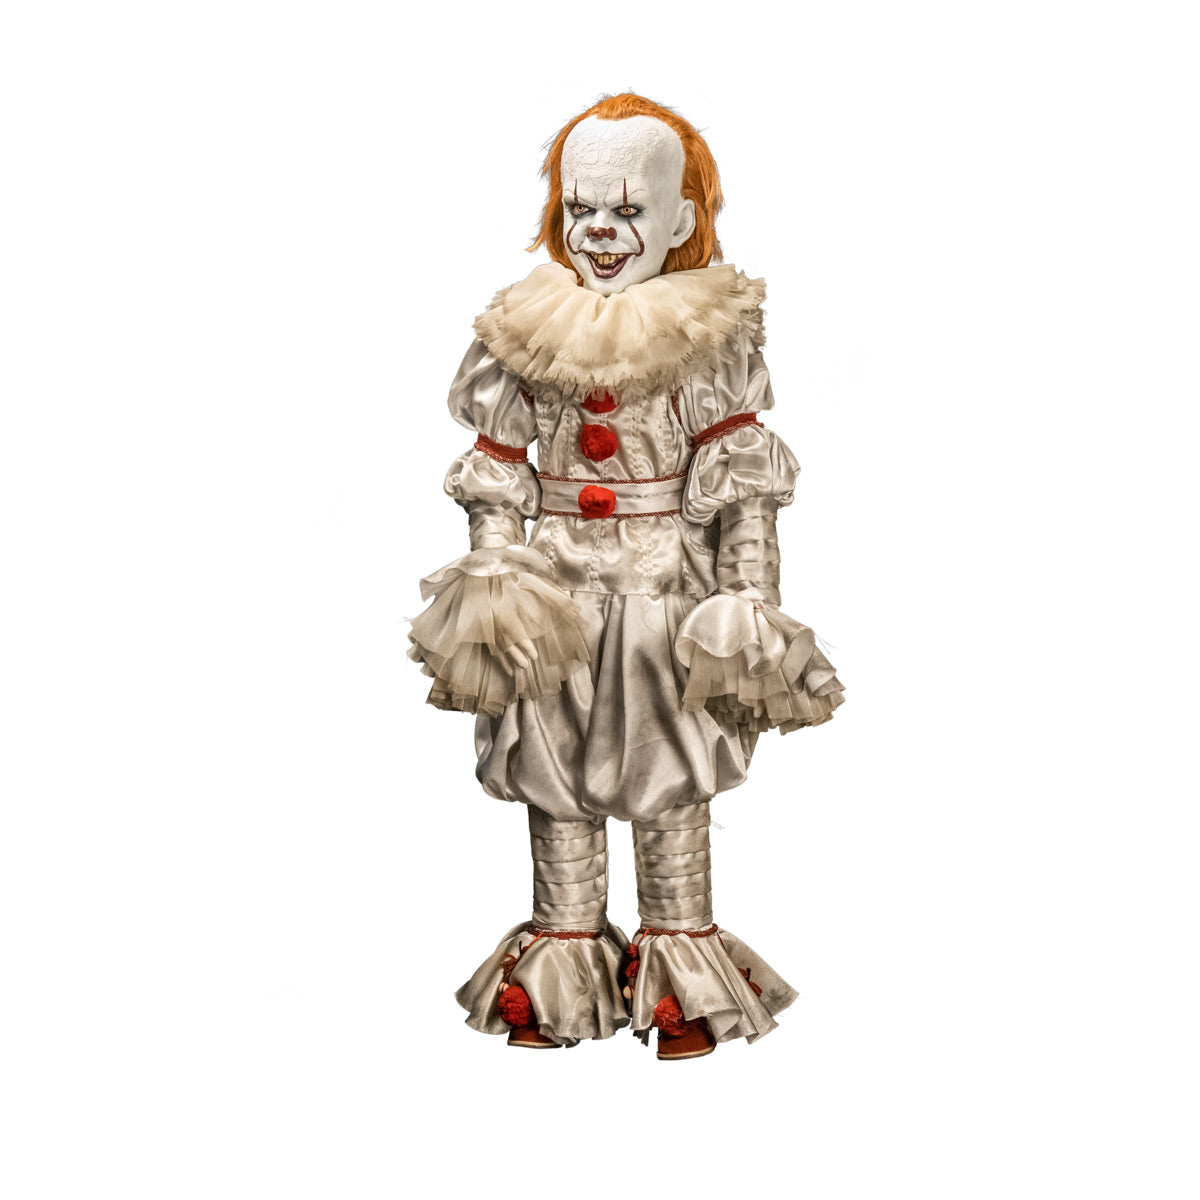 IT - Premium Pennywise 50" Posable Scale Doll